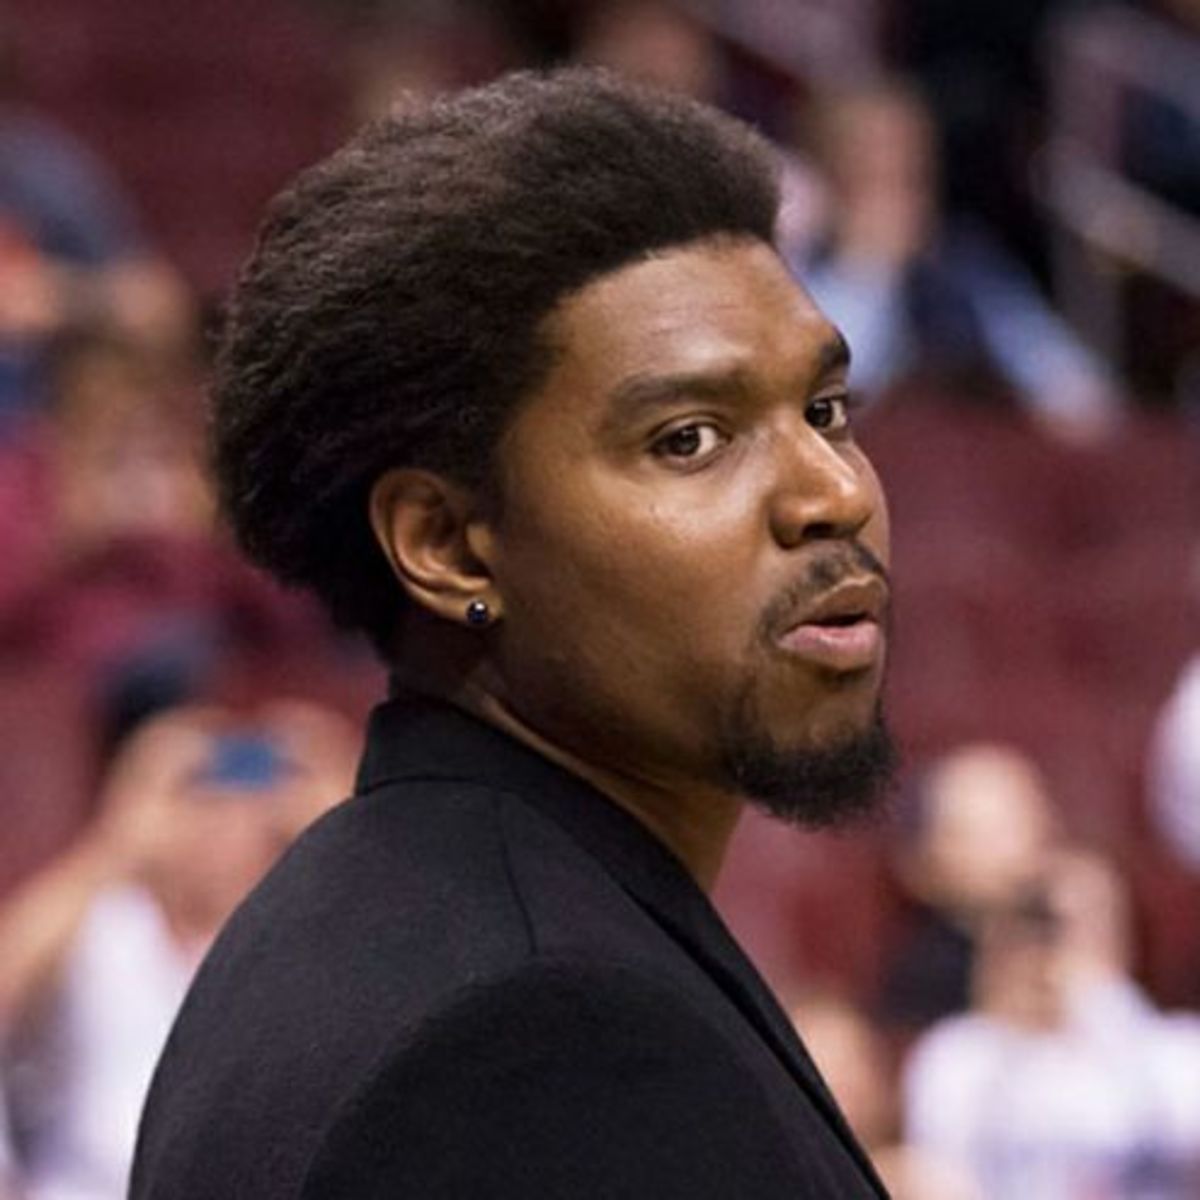 Andrew-Bynum-hairstyle